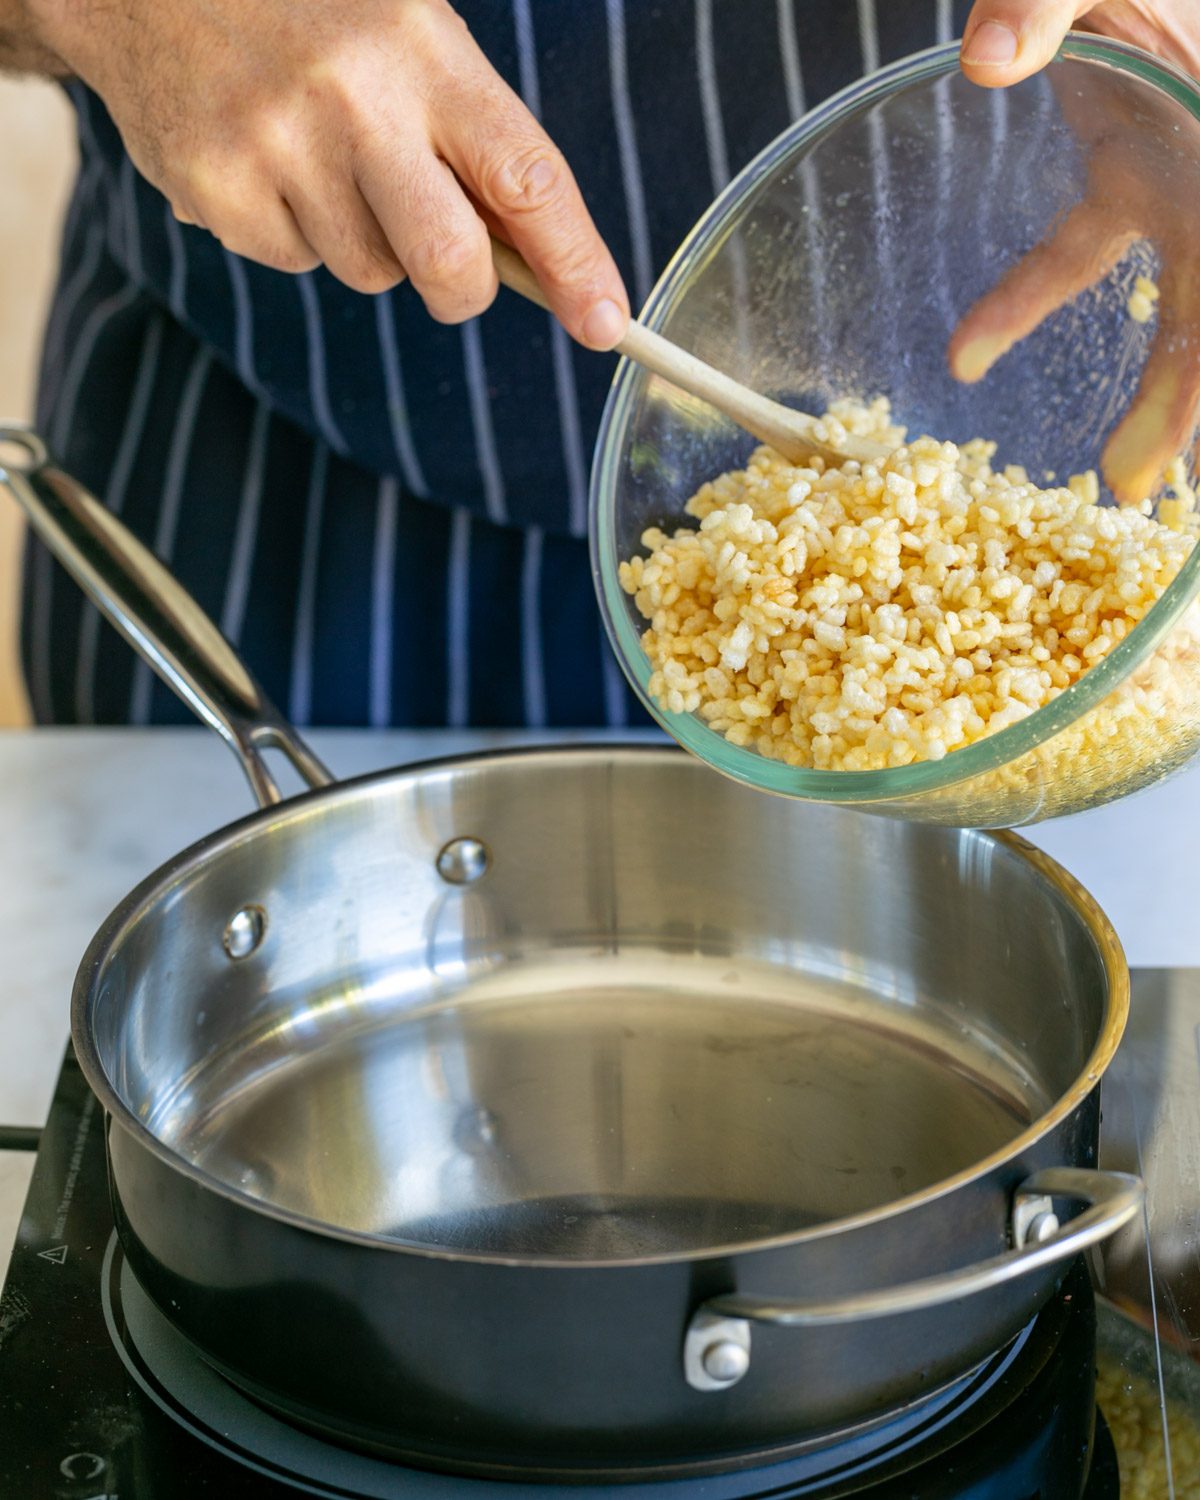 Adding puffed rice with sugar syrup to a pan